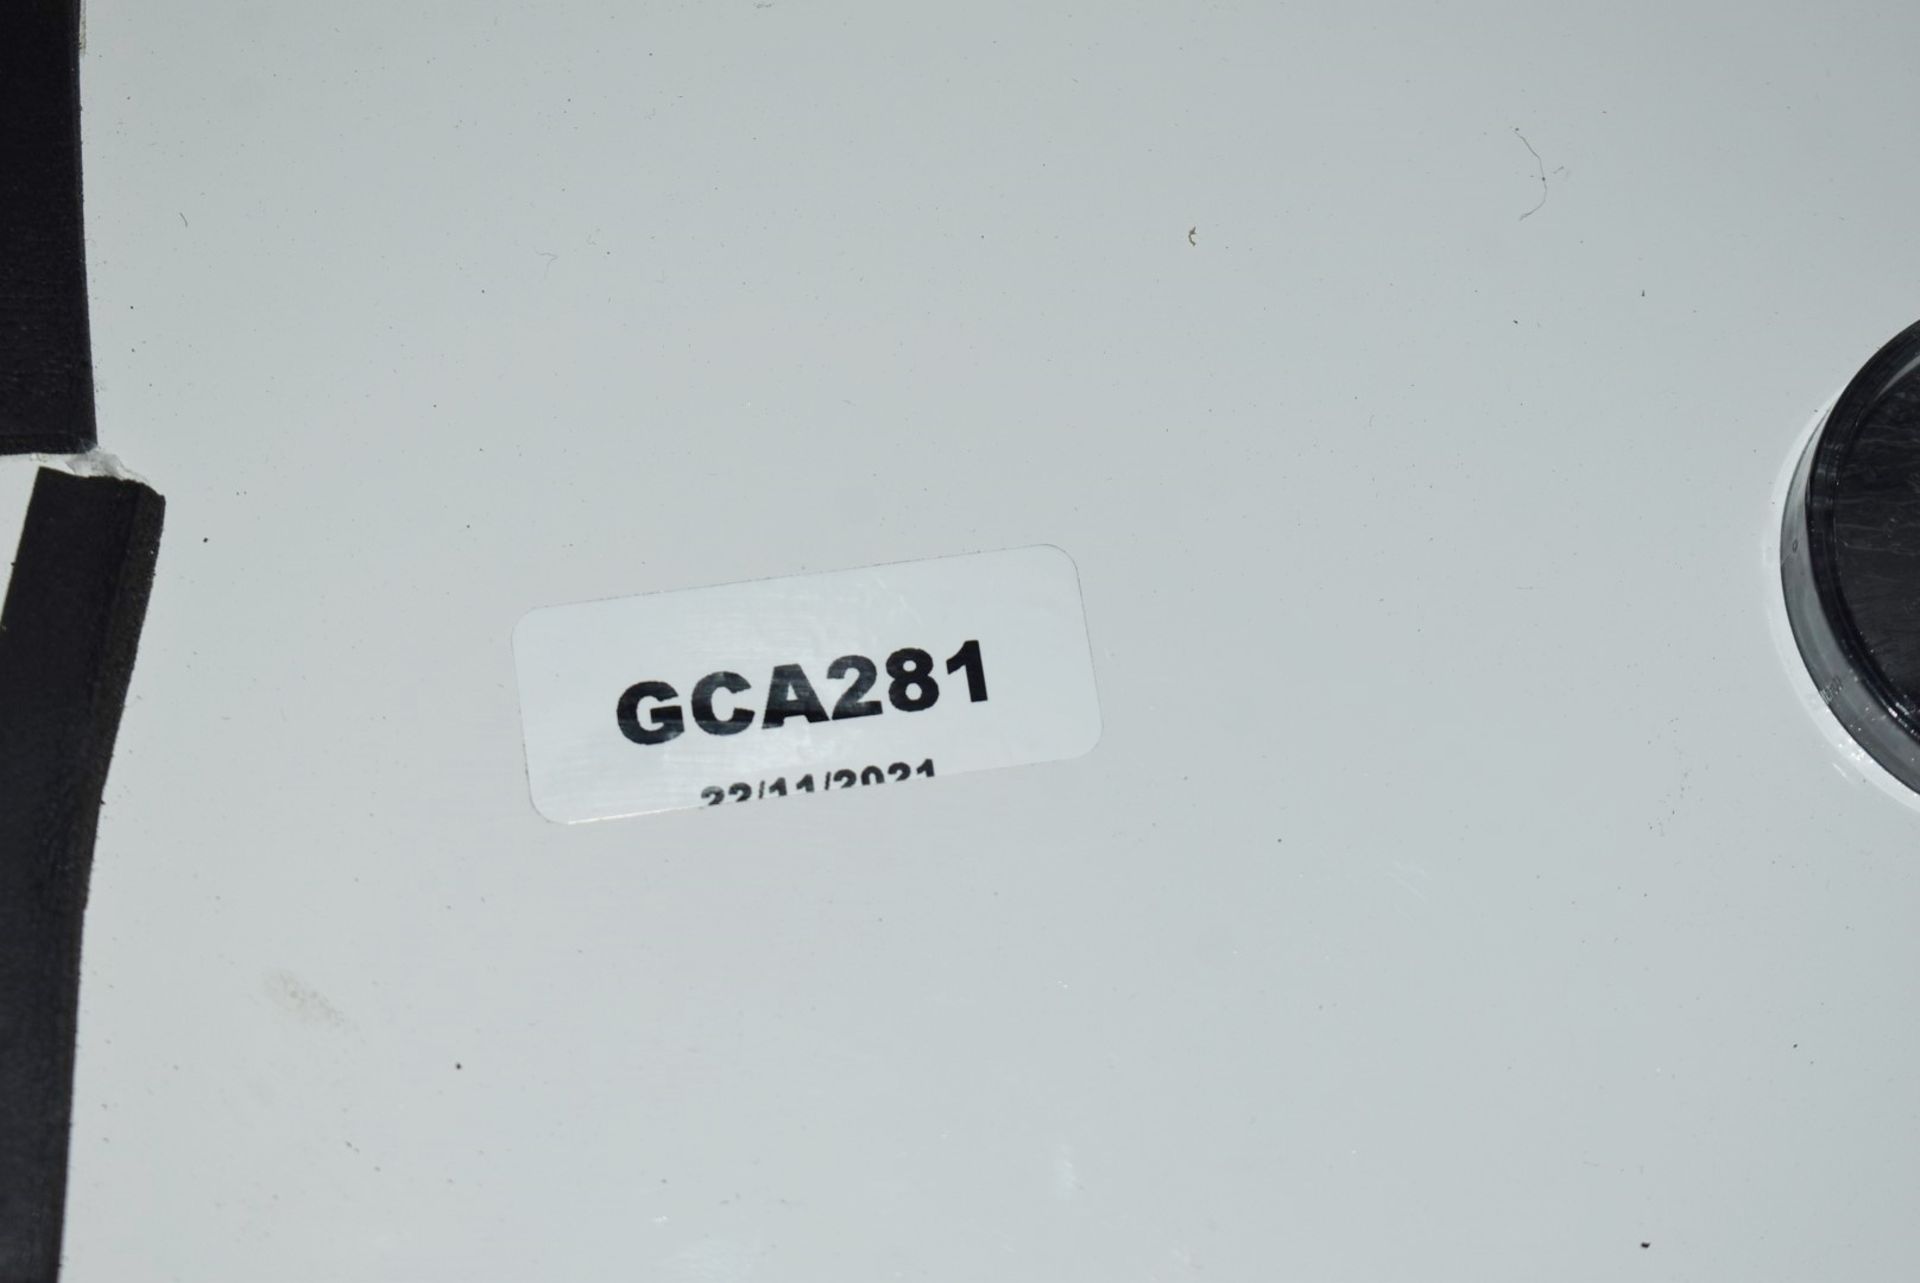 1 x Combat CTCU A32 LPG Suspended Warm Air Heater - Year 2016 - Gas Type LPG Gas G31 - 230V - - Image 12 of 12